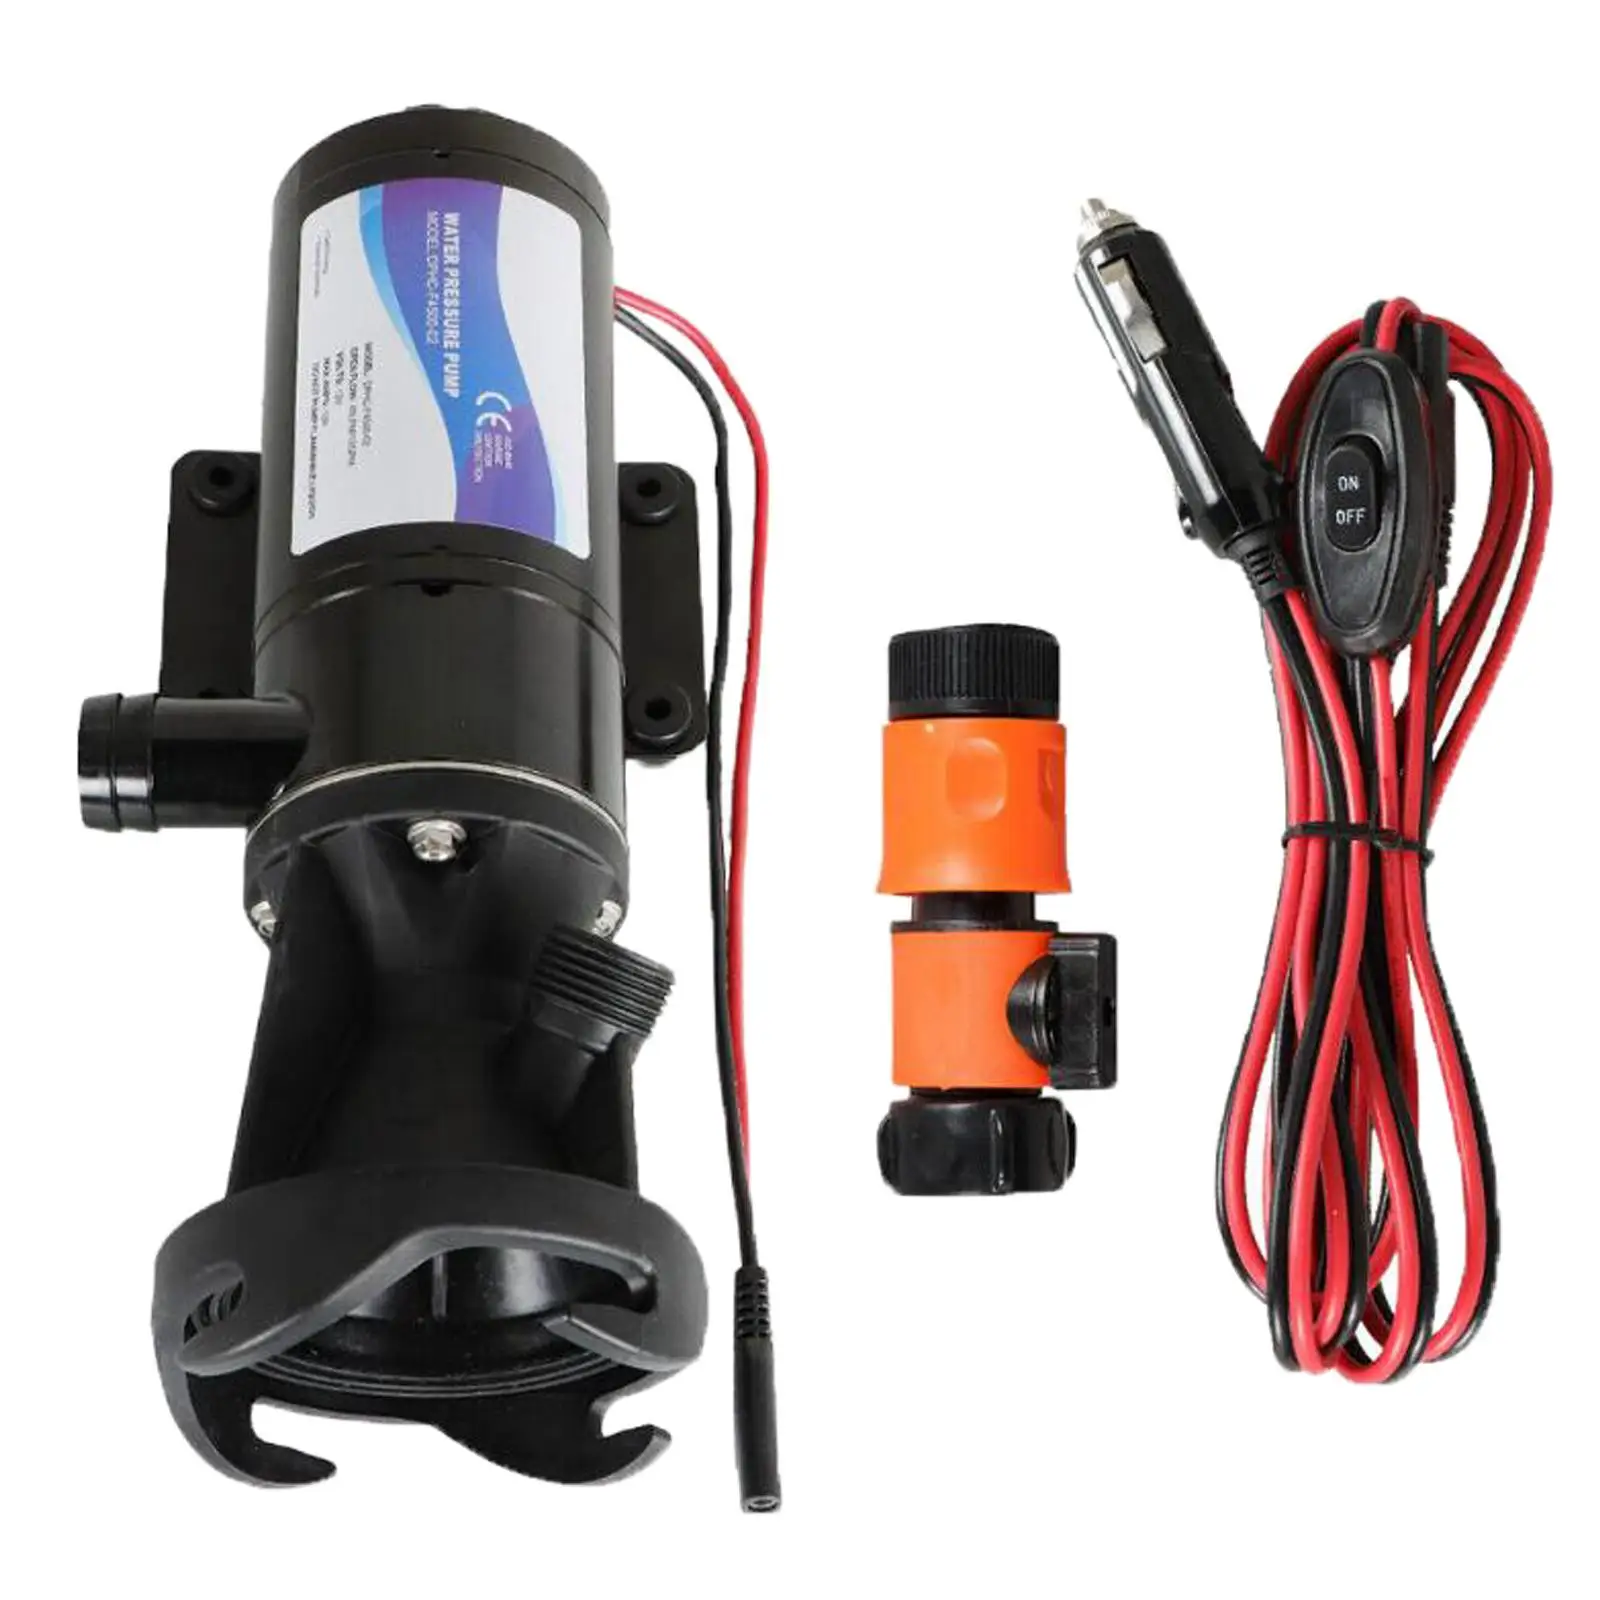 RV Macerator Pump  Sewage Pump 12V DC Motor Portable Waste Water  for Motorhome  Vehicle Part Accessories